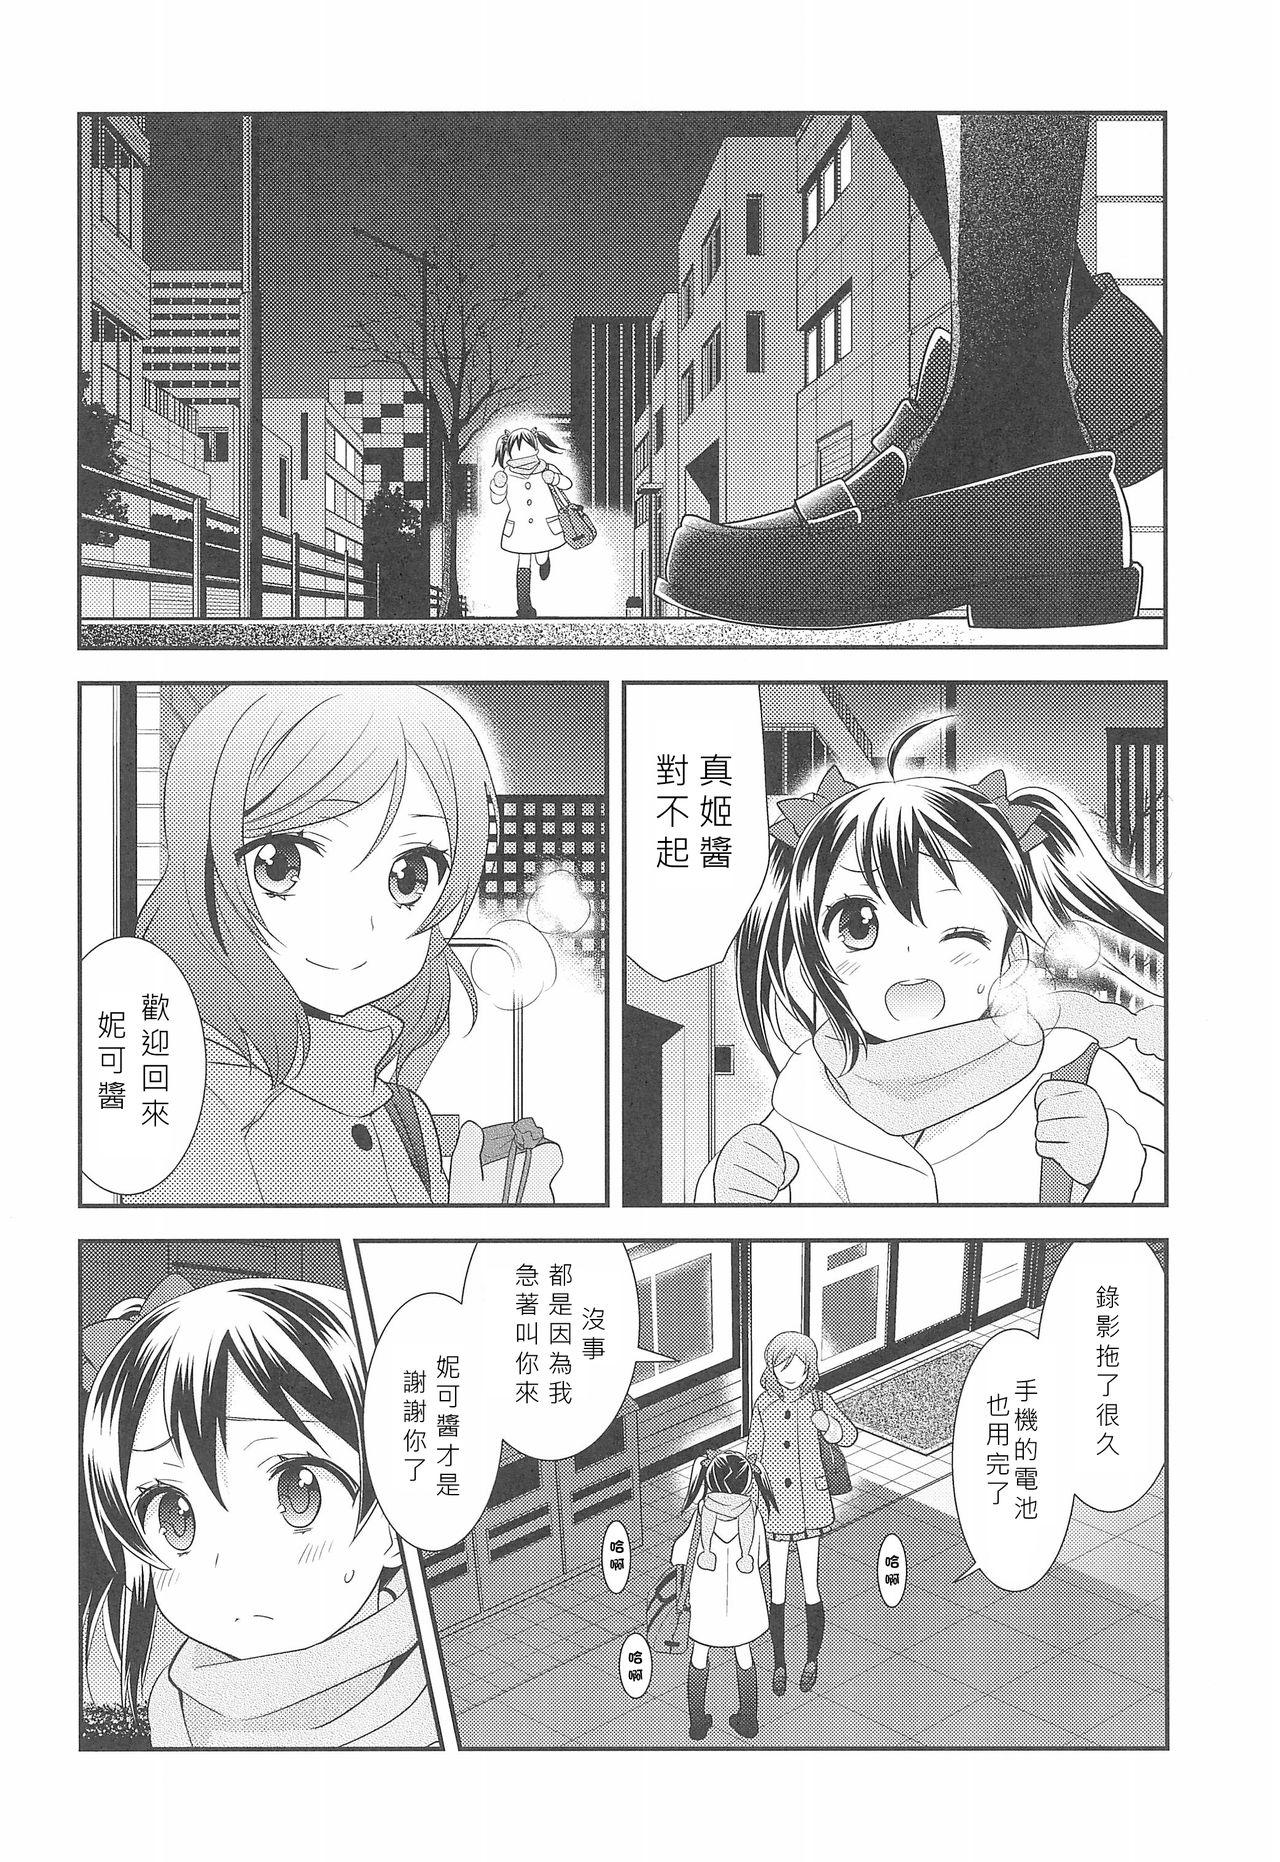 Sluts BABY I LOVE YOU - Love live Orgame - Page 5